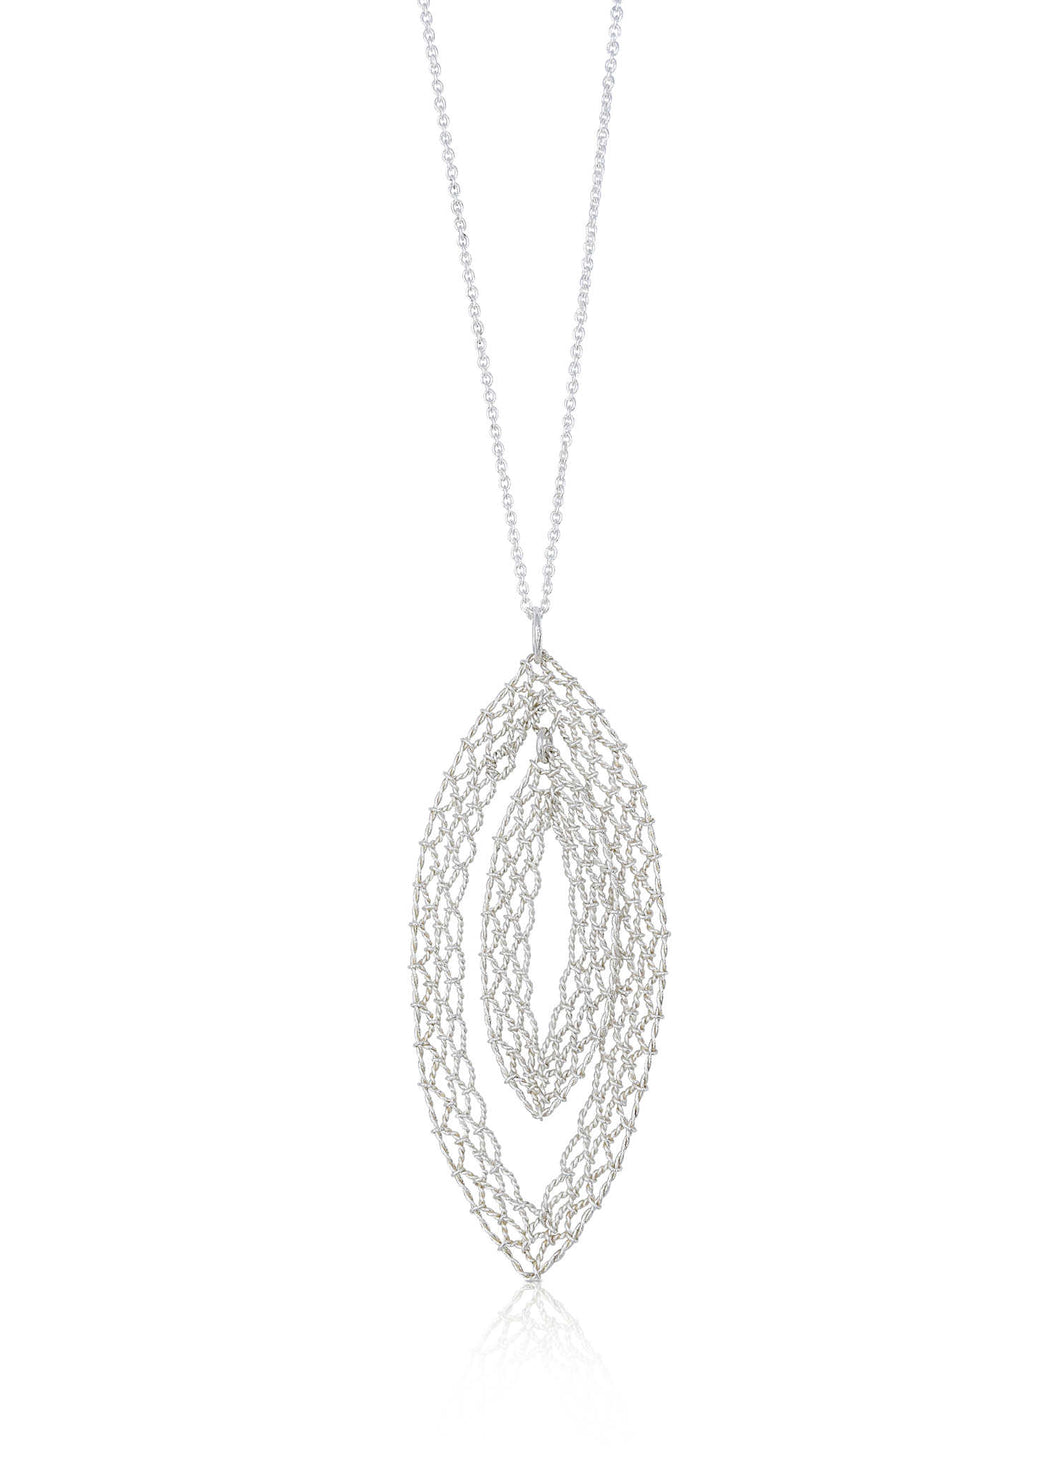 Yu Fang Chi - Pointed oval pendant